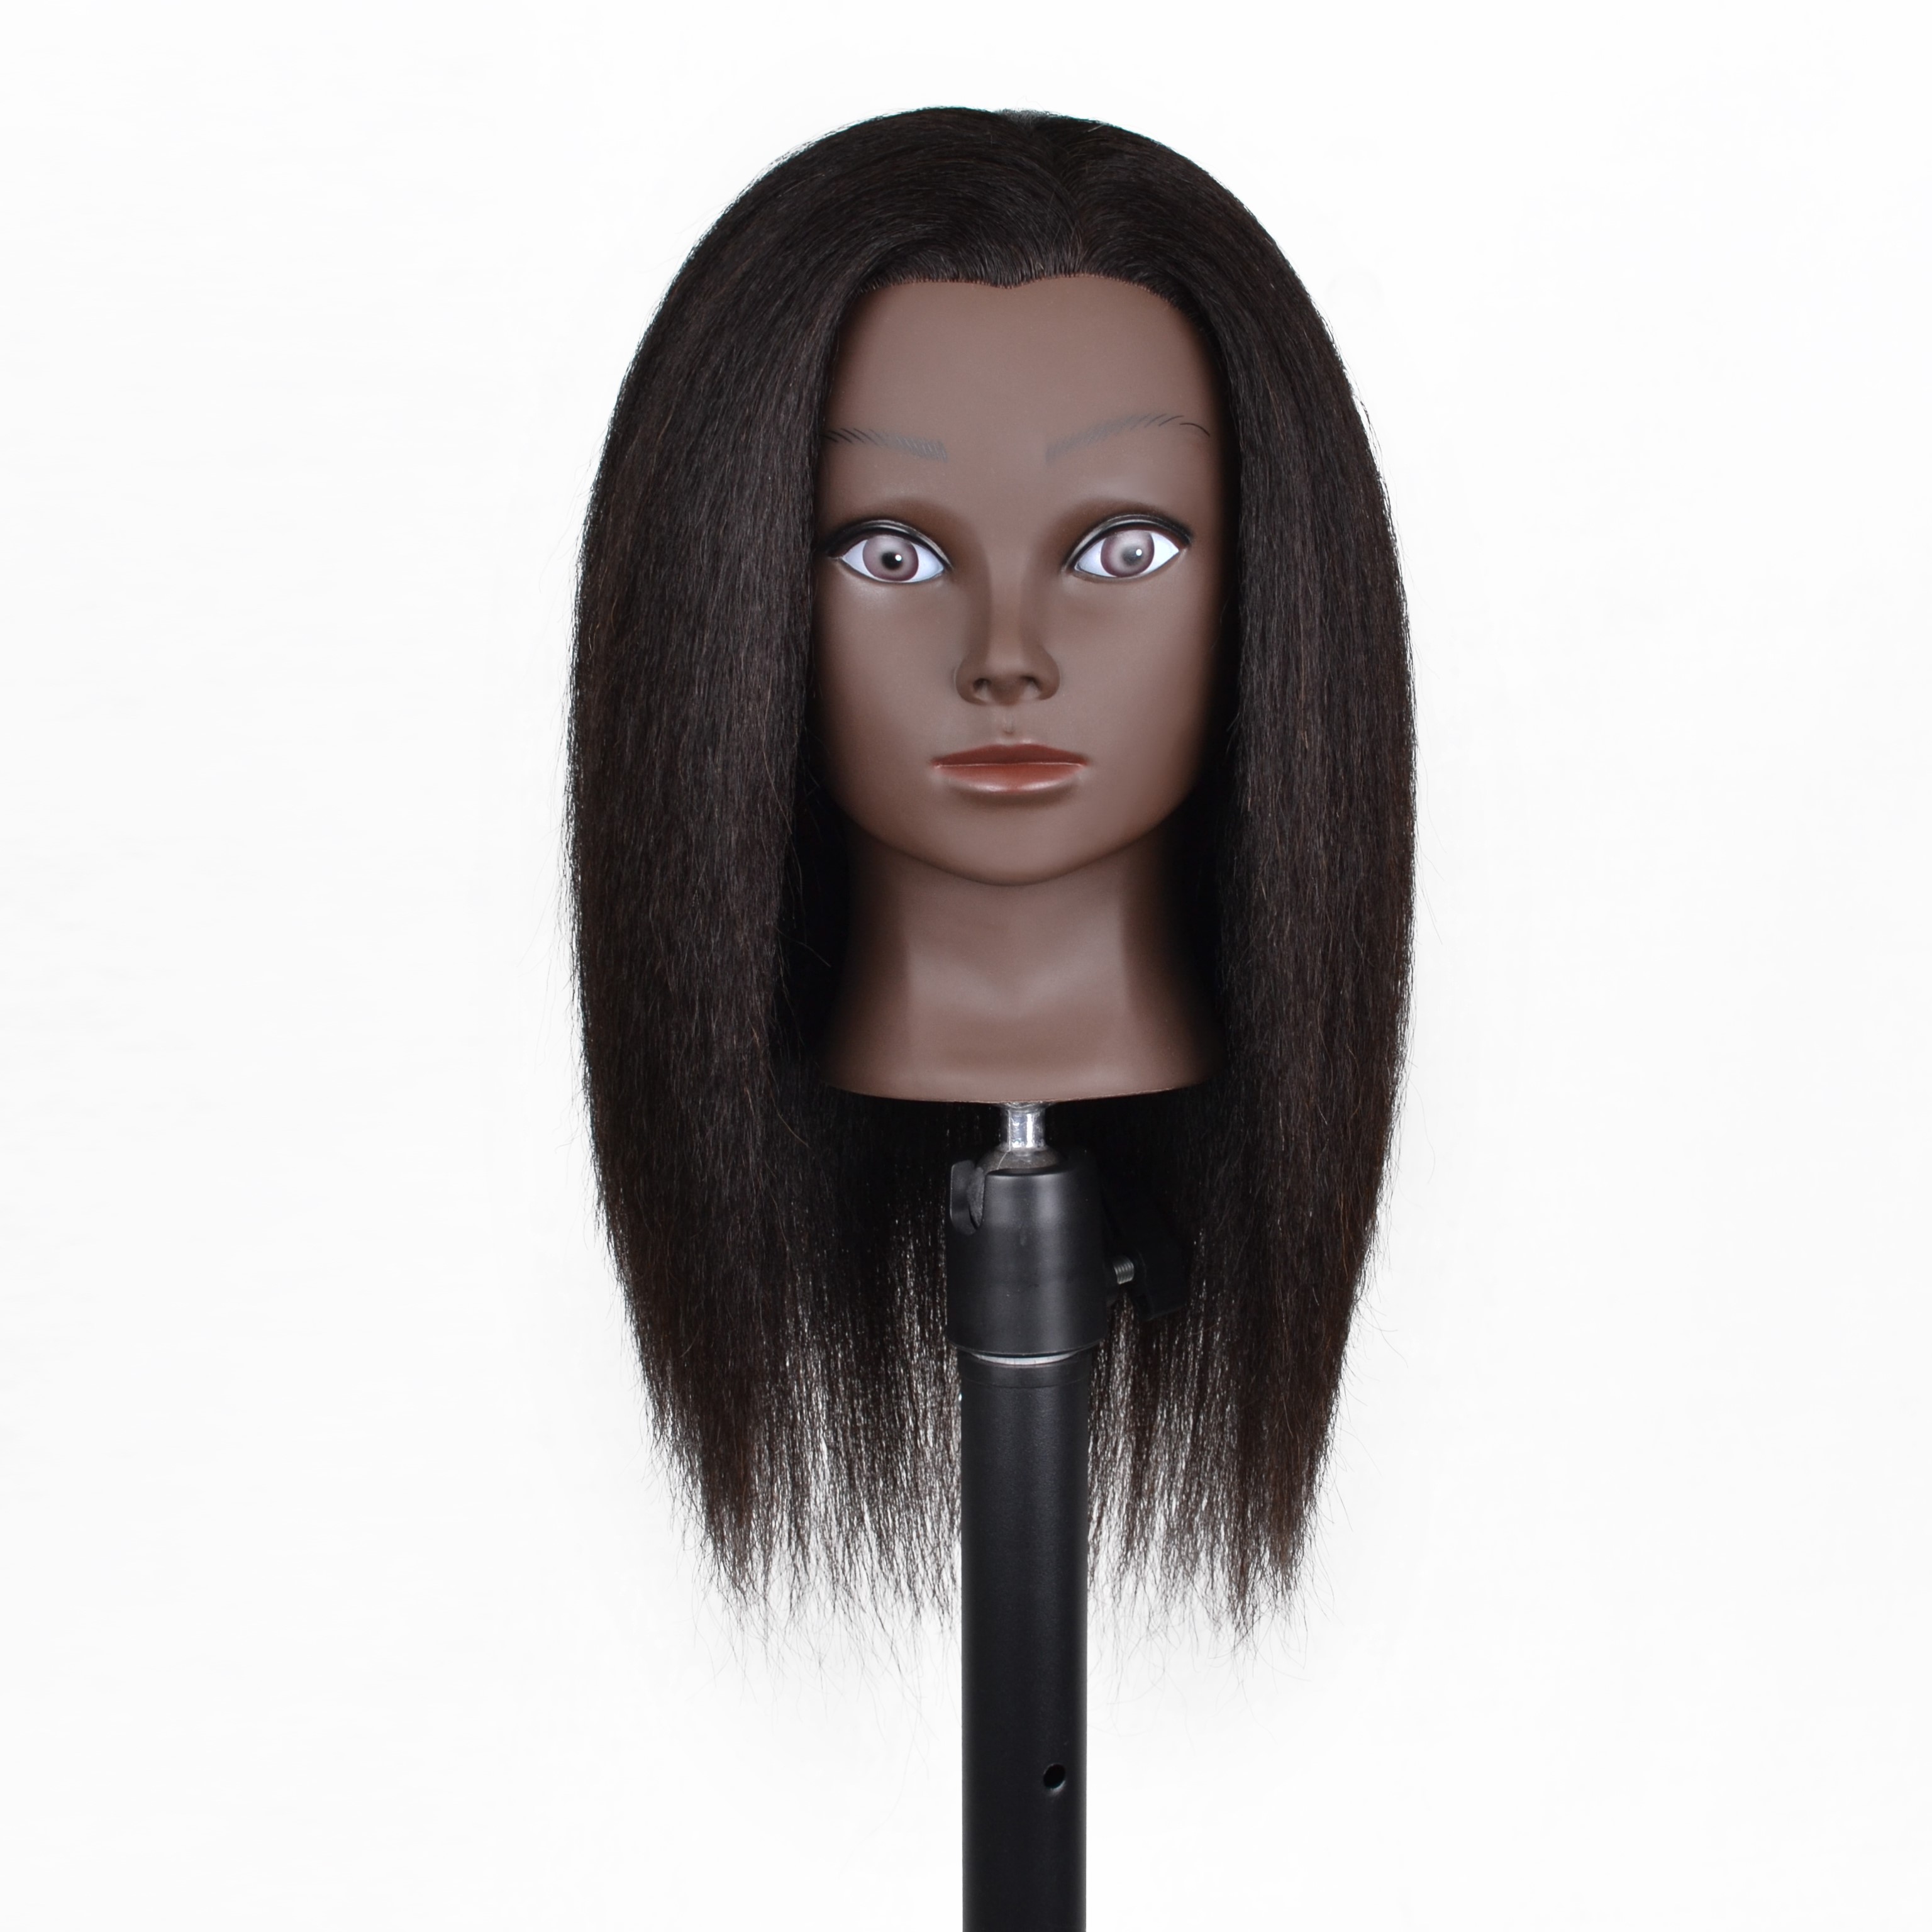 <strong>LCKM008 Mannequin Head with 100% Hair</strong>